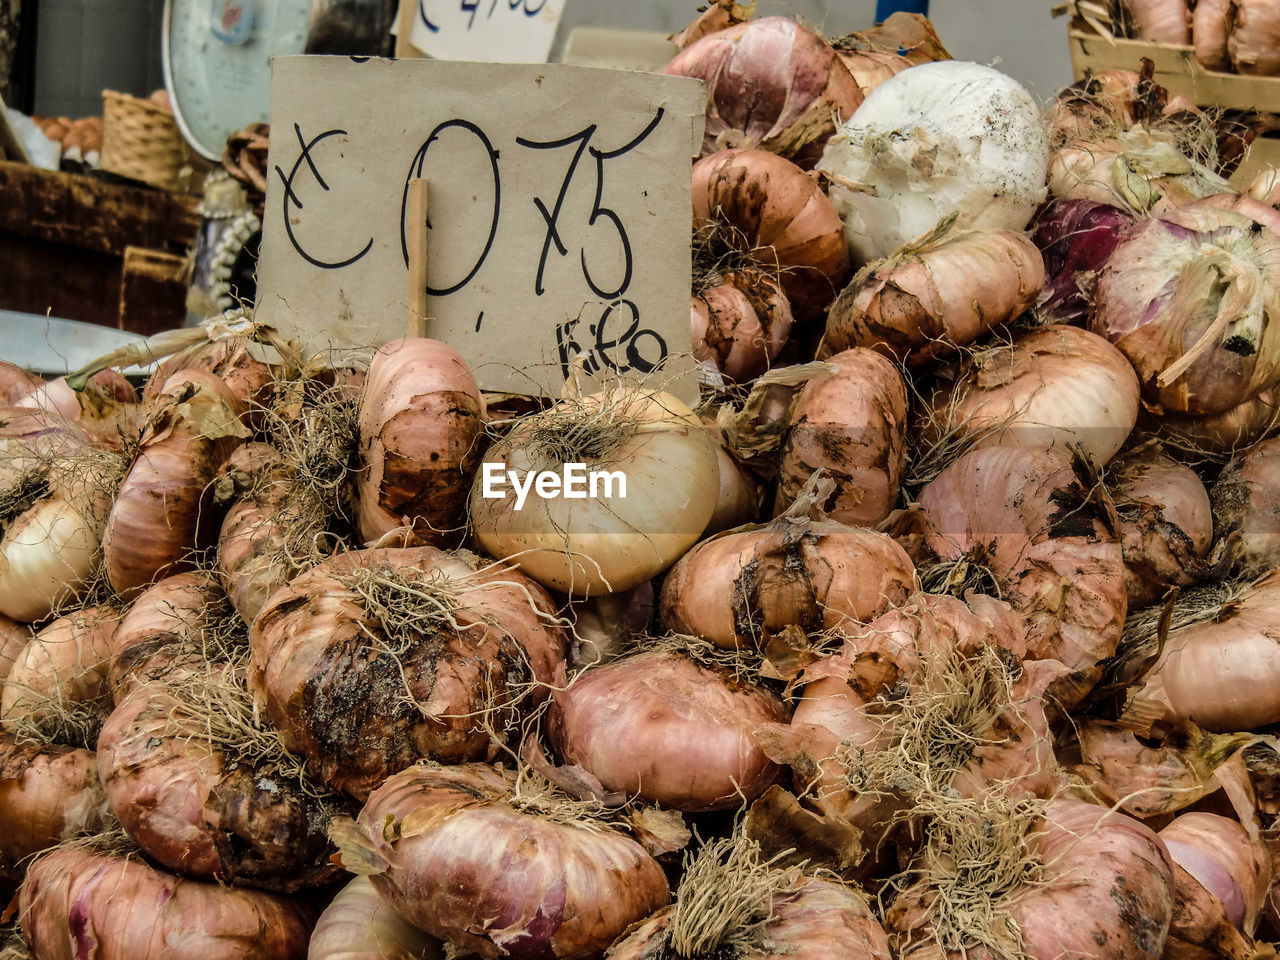 Close-up of onions for sale at market stall